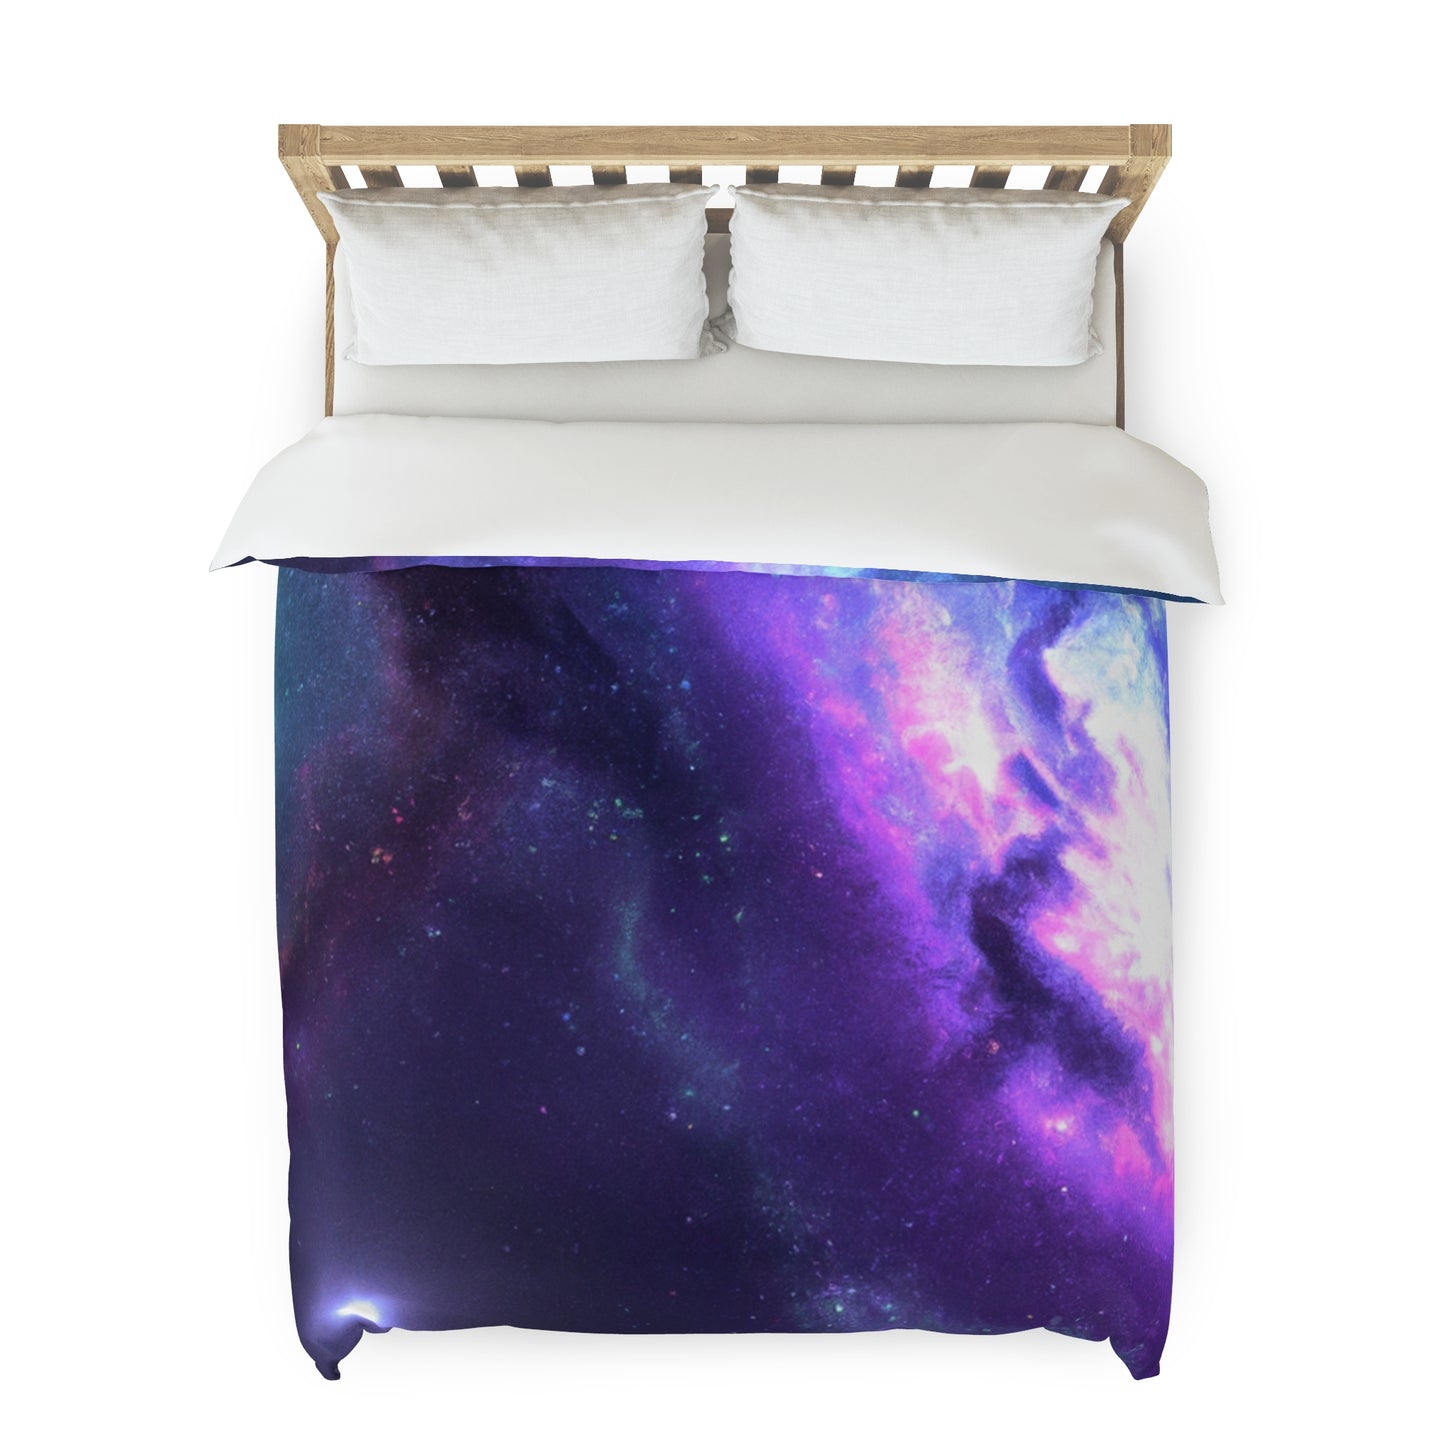 The Dream Weaver: A 1950's American Dream - Astronomy Duvet Bed Cover